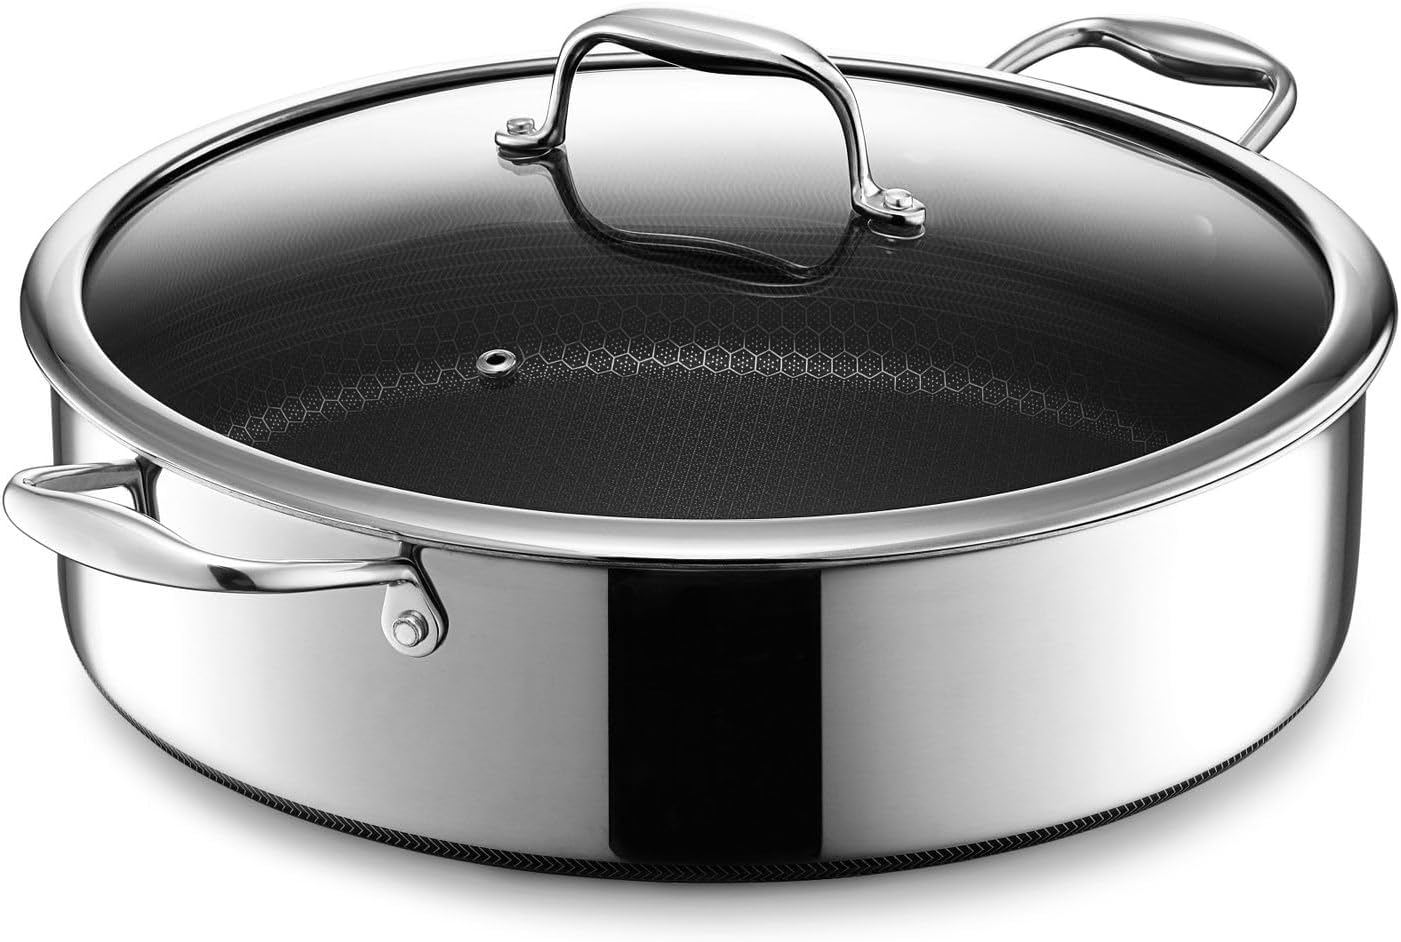 HexClad 7 Quart Hybrid Saute Pan, Nonstick Chicken Fryer, Dishwasher and Oven Friendly, Compatible with All Cooktops